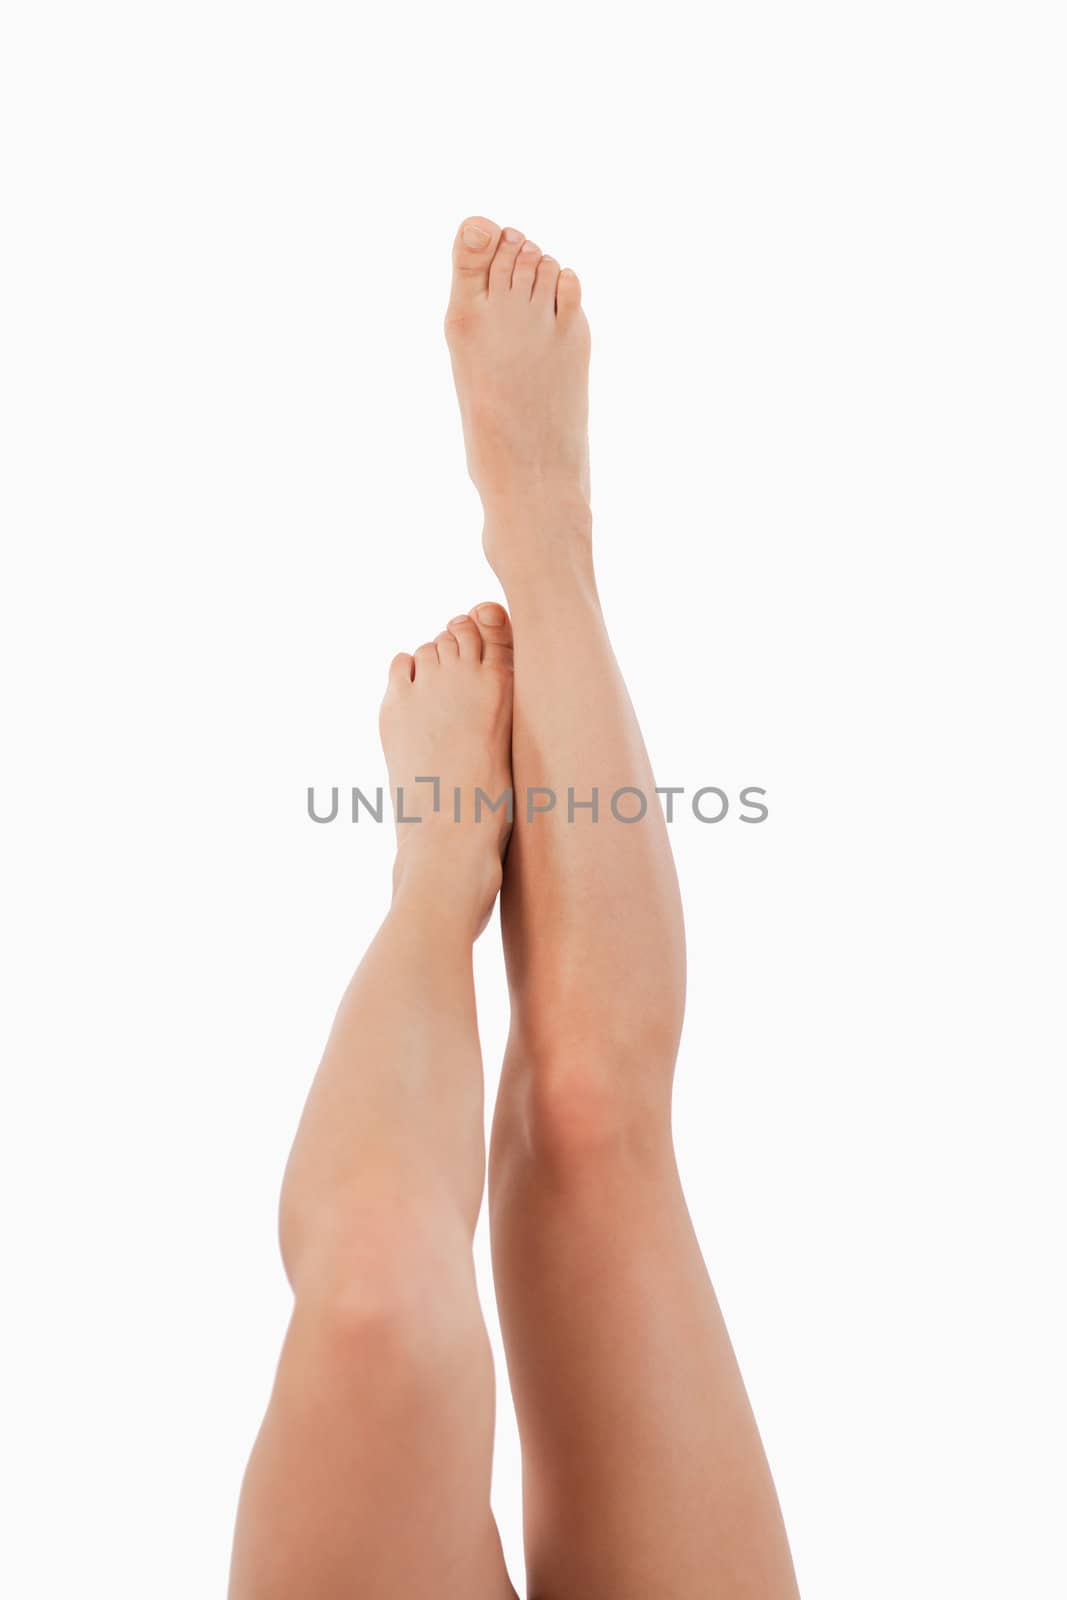 Portrait of the front of feminine legs going up against a white background